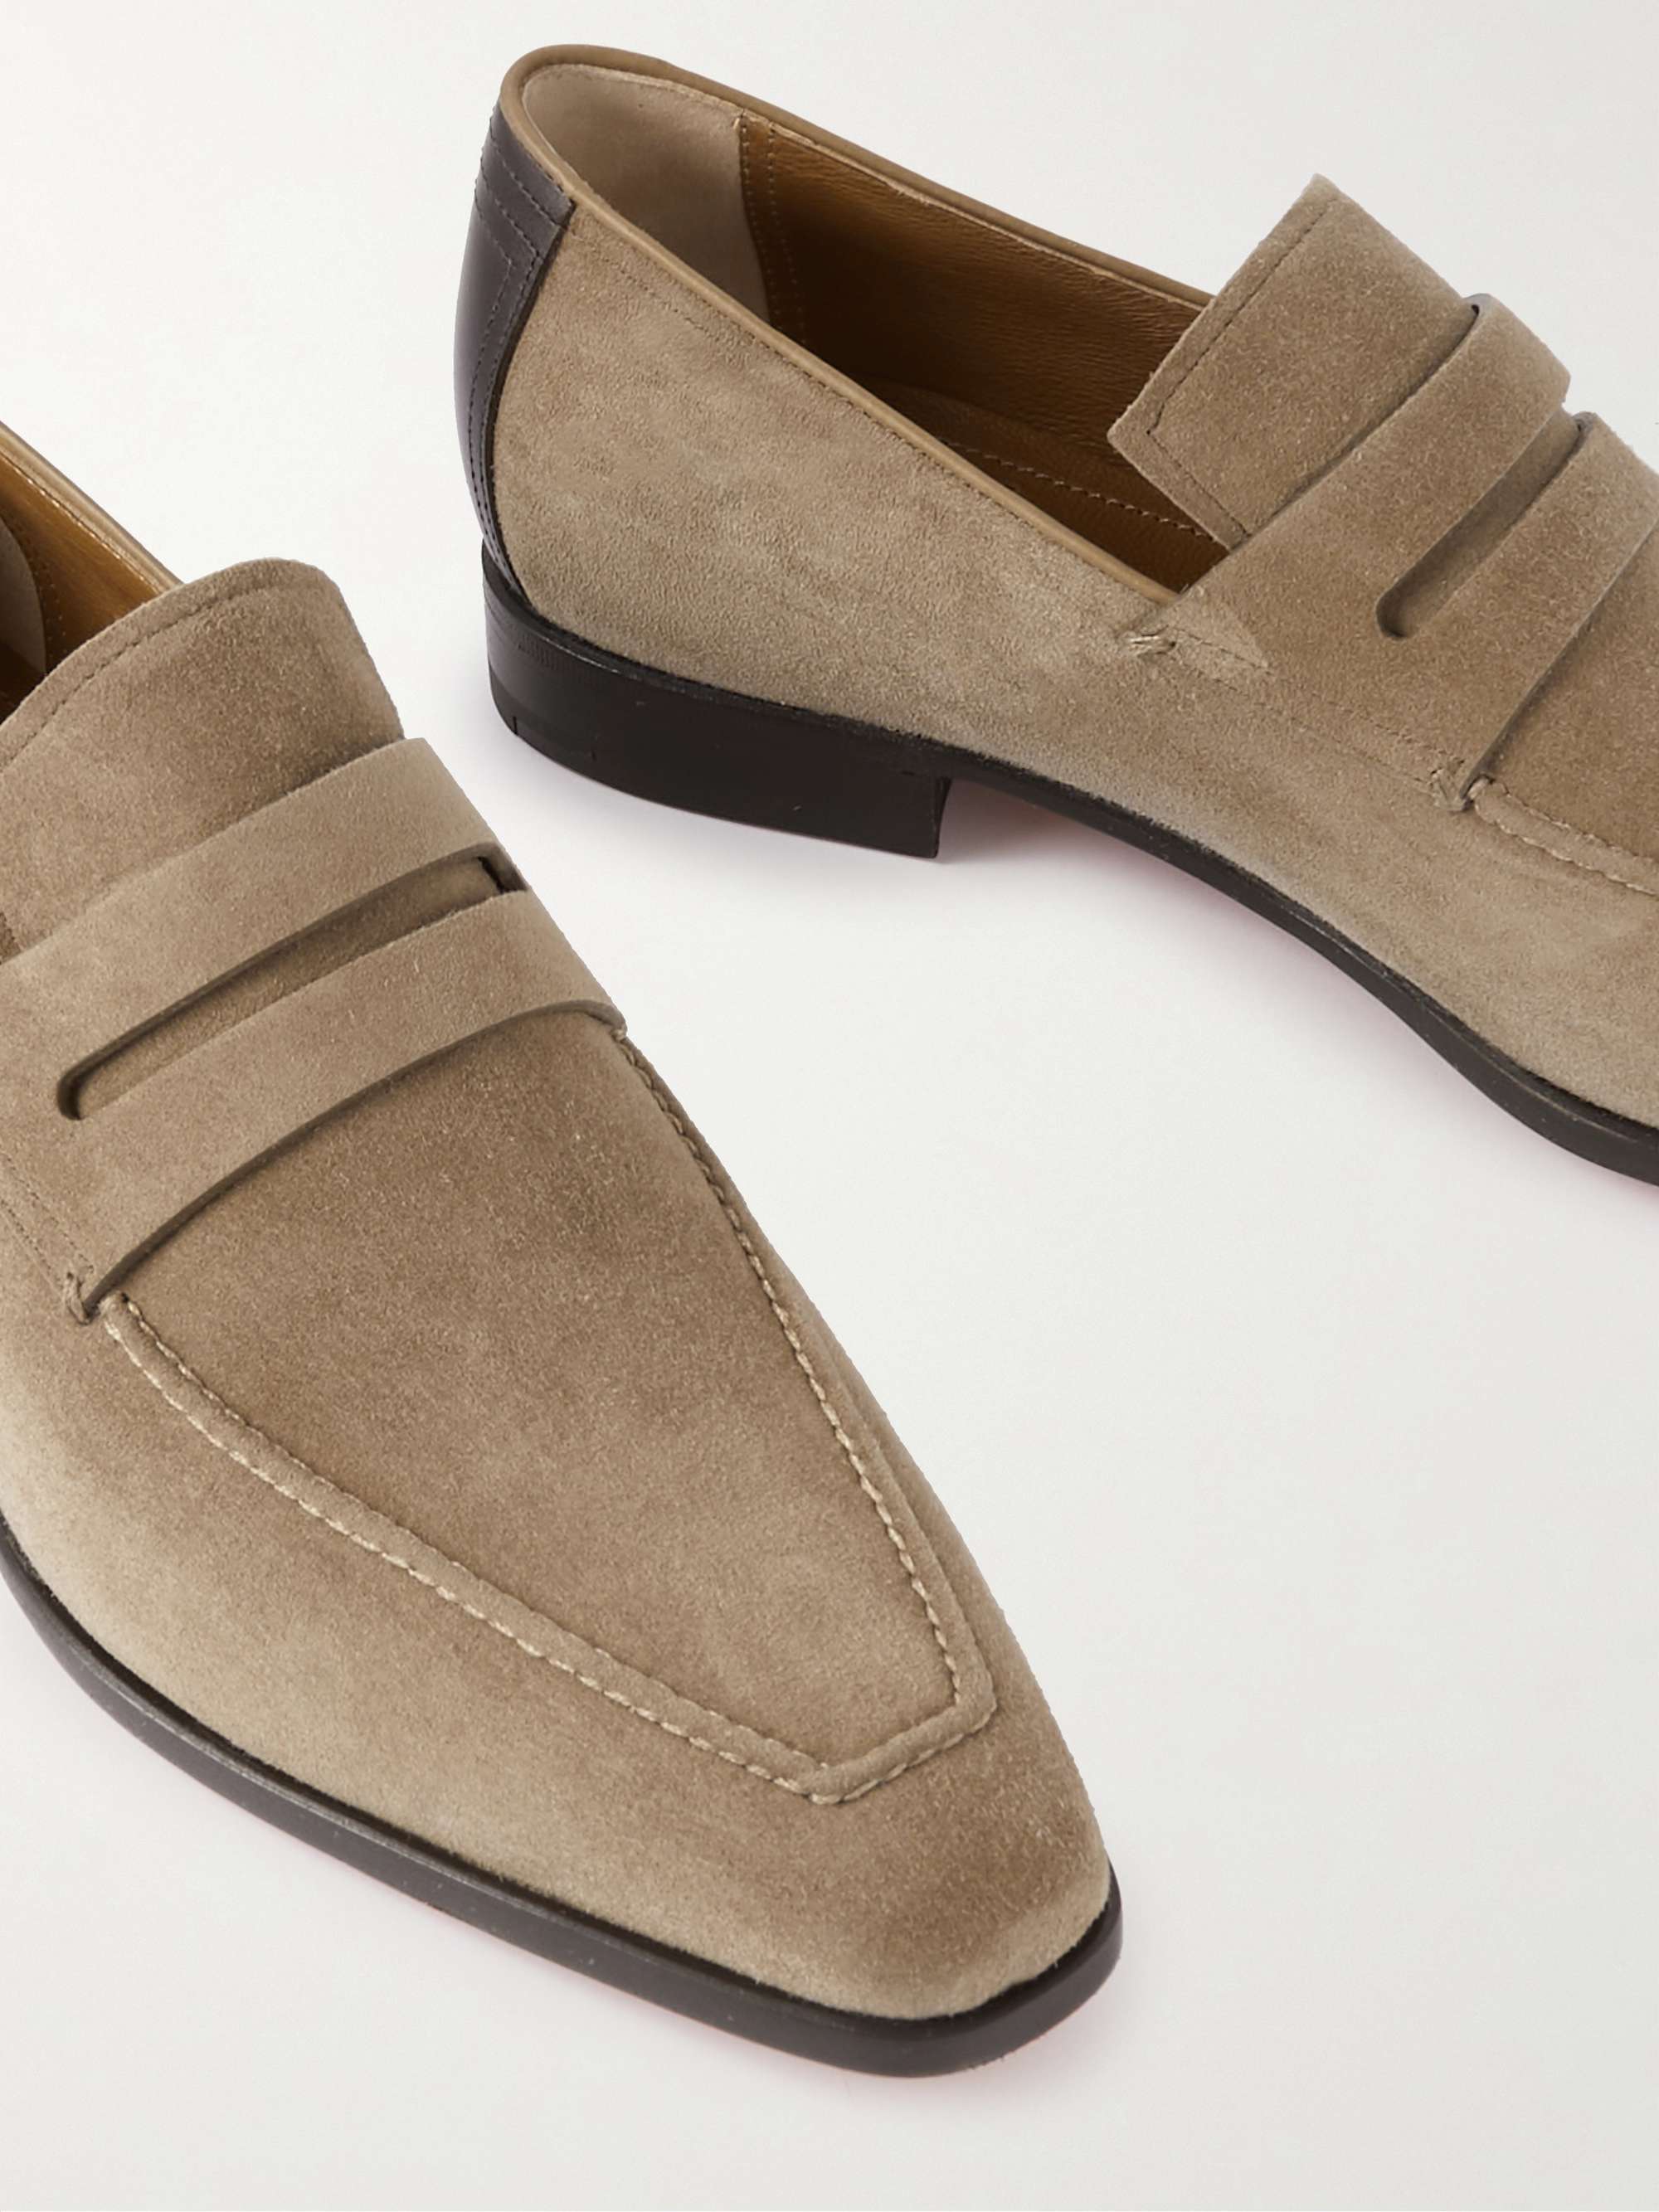 BERLUTI Leather-Trimmed Suede Penny Loafers for Men | MR PORTER